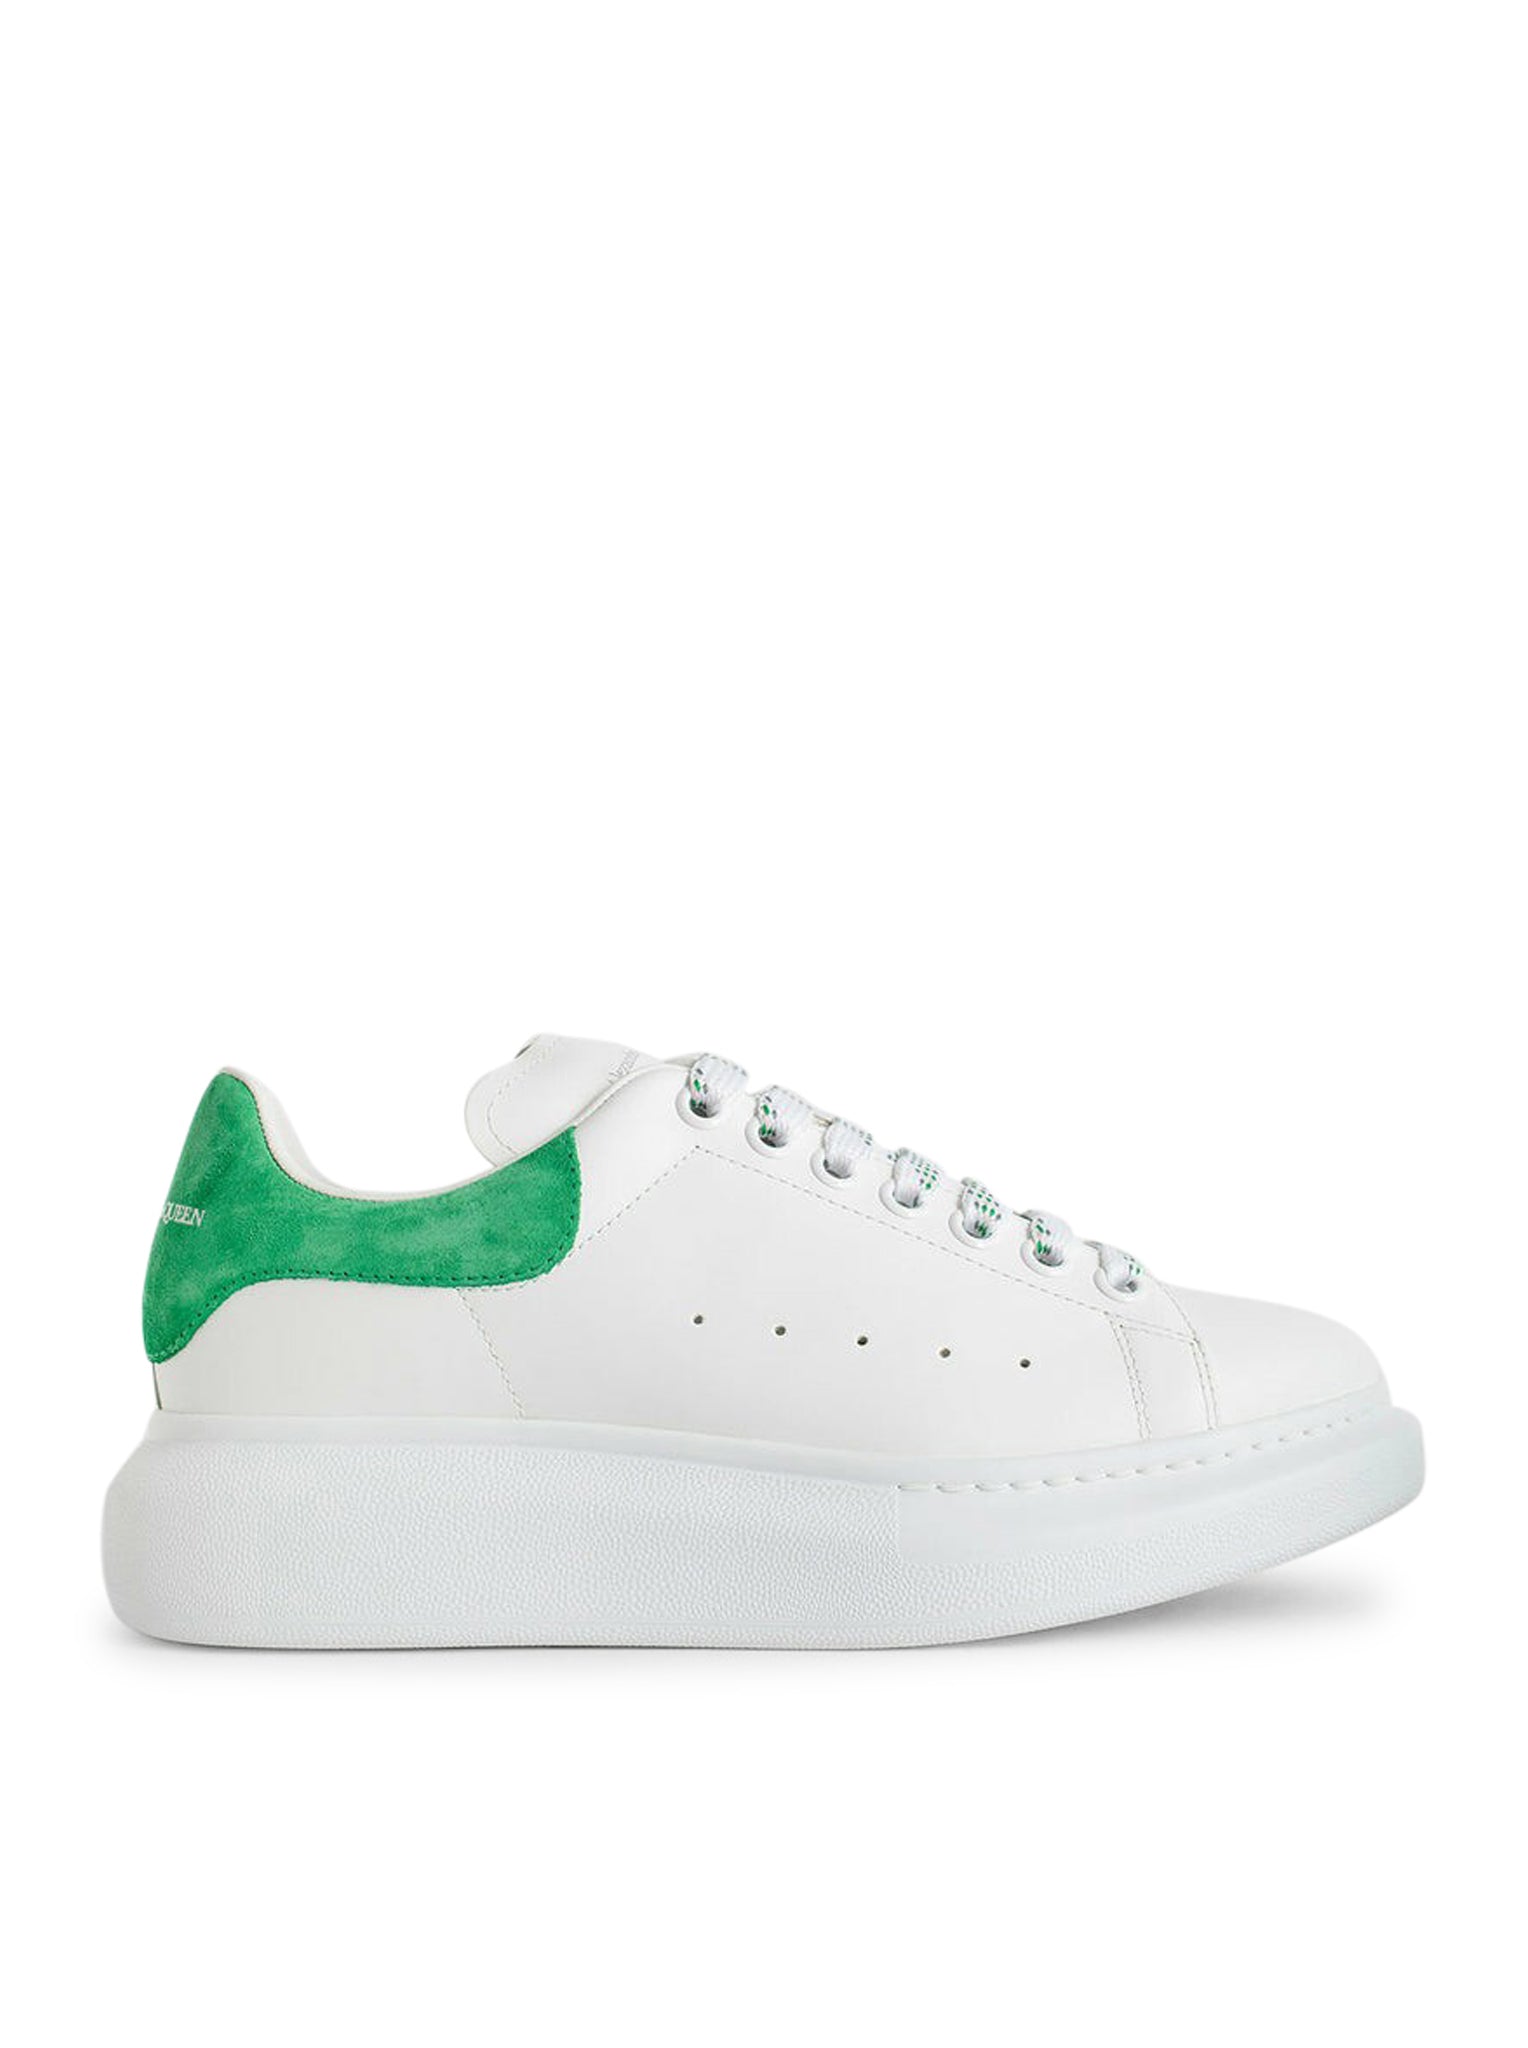 LARRY LEATHER OVERSIZED SNEAKERS